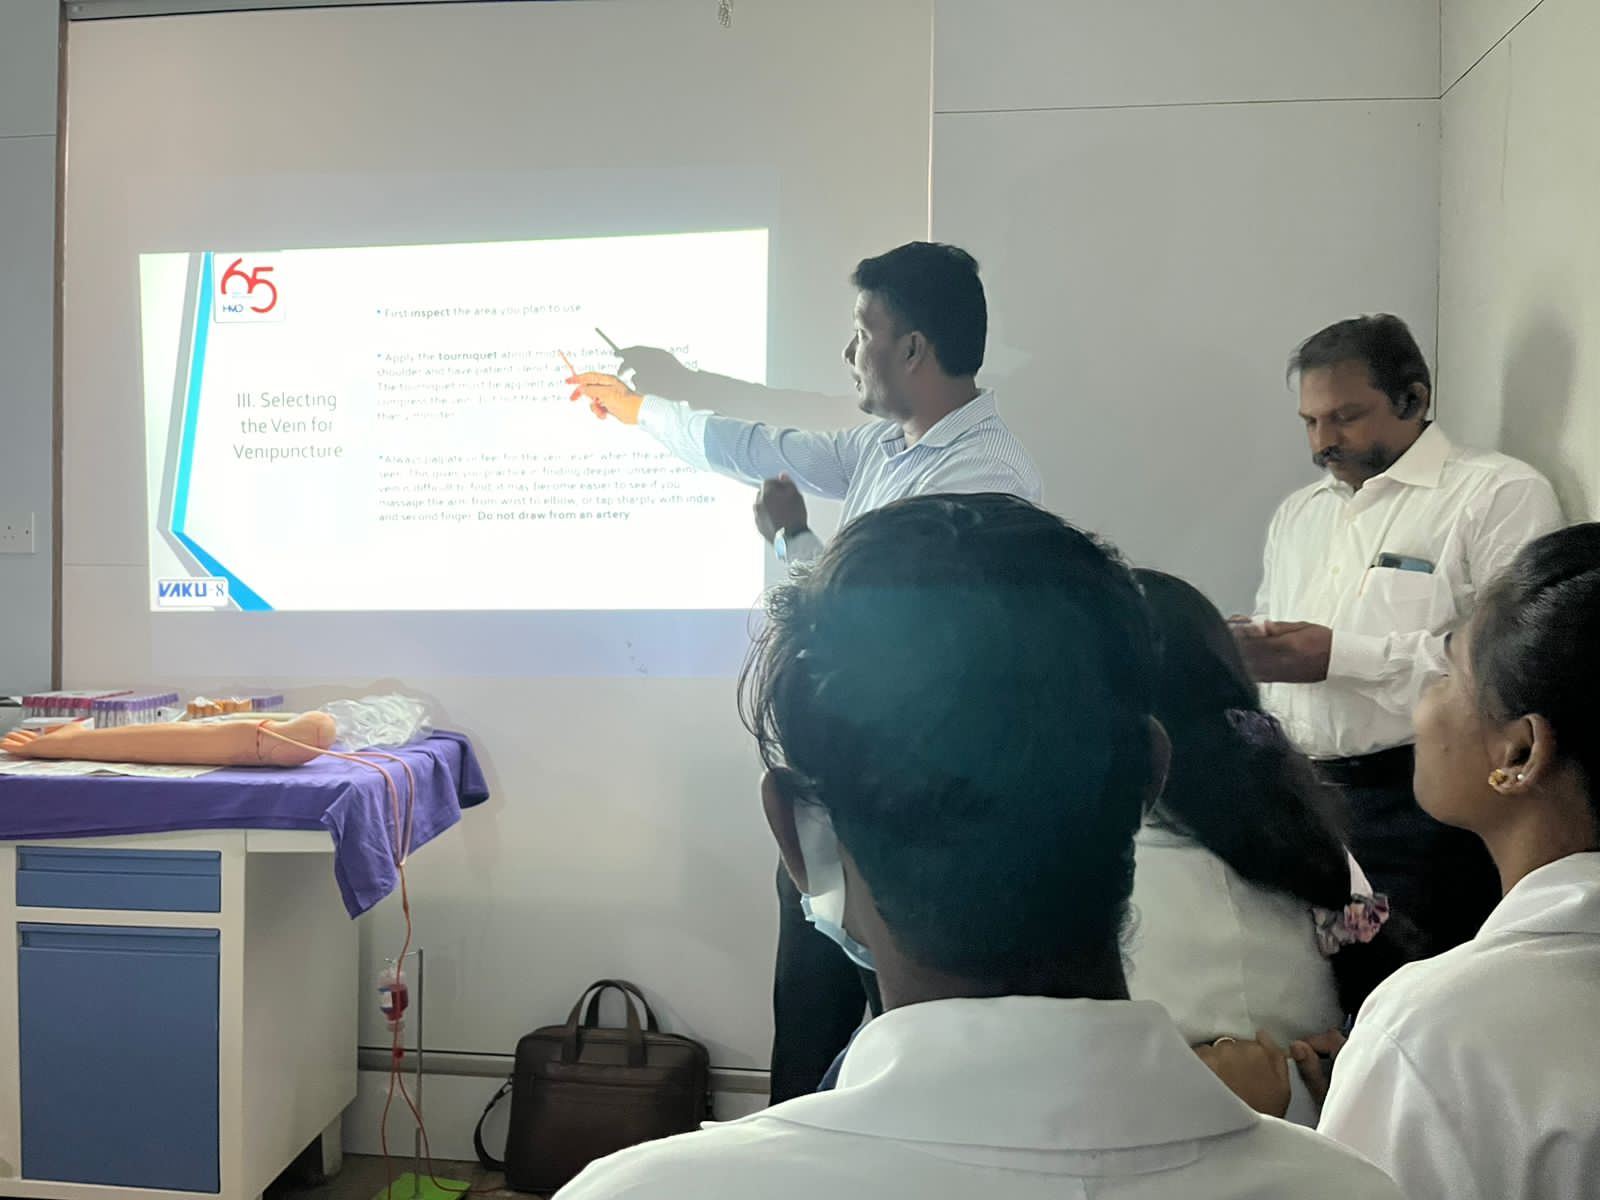 Blood Collection Procedures & Safety Needles Preventions - Sundaram Medical Foundation at Chennai 